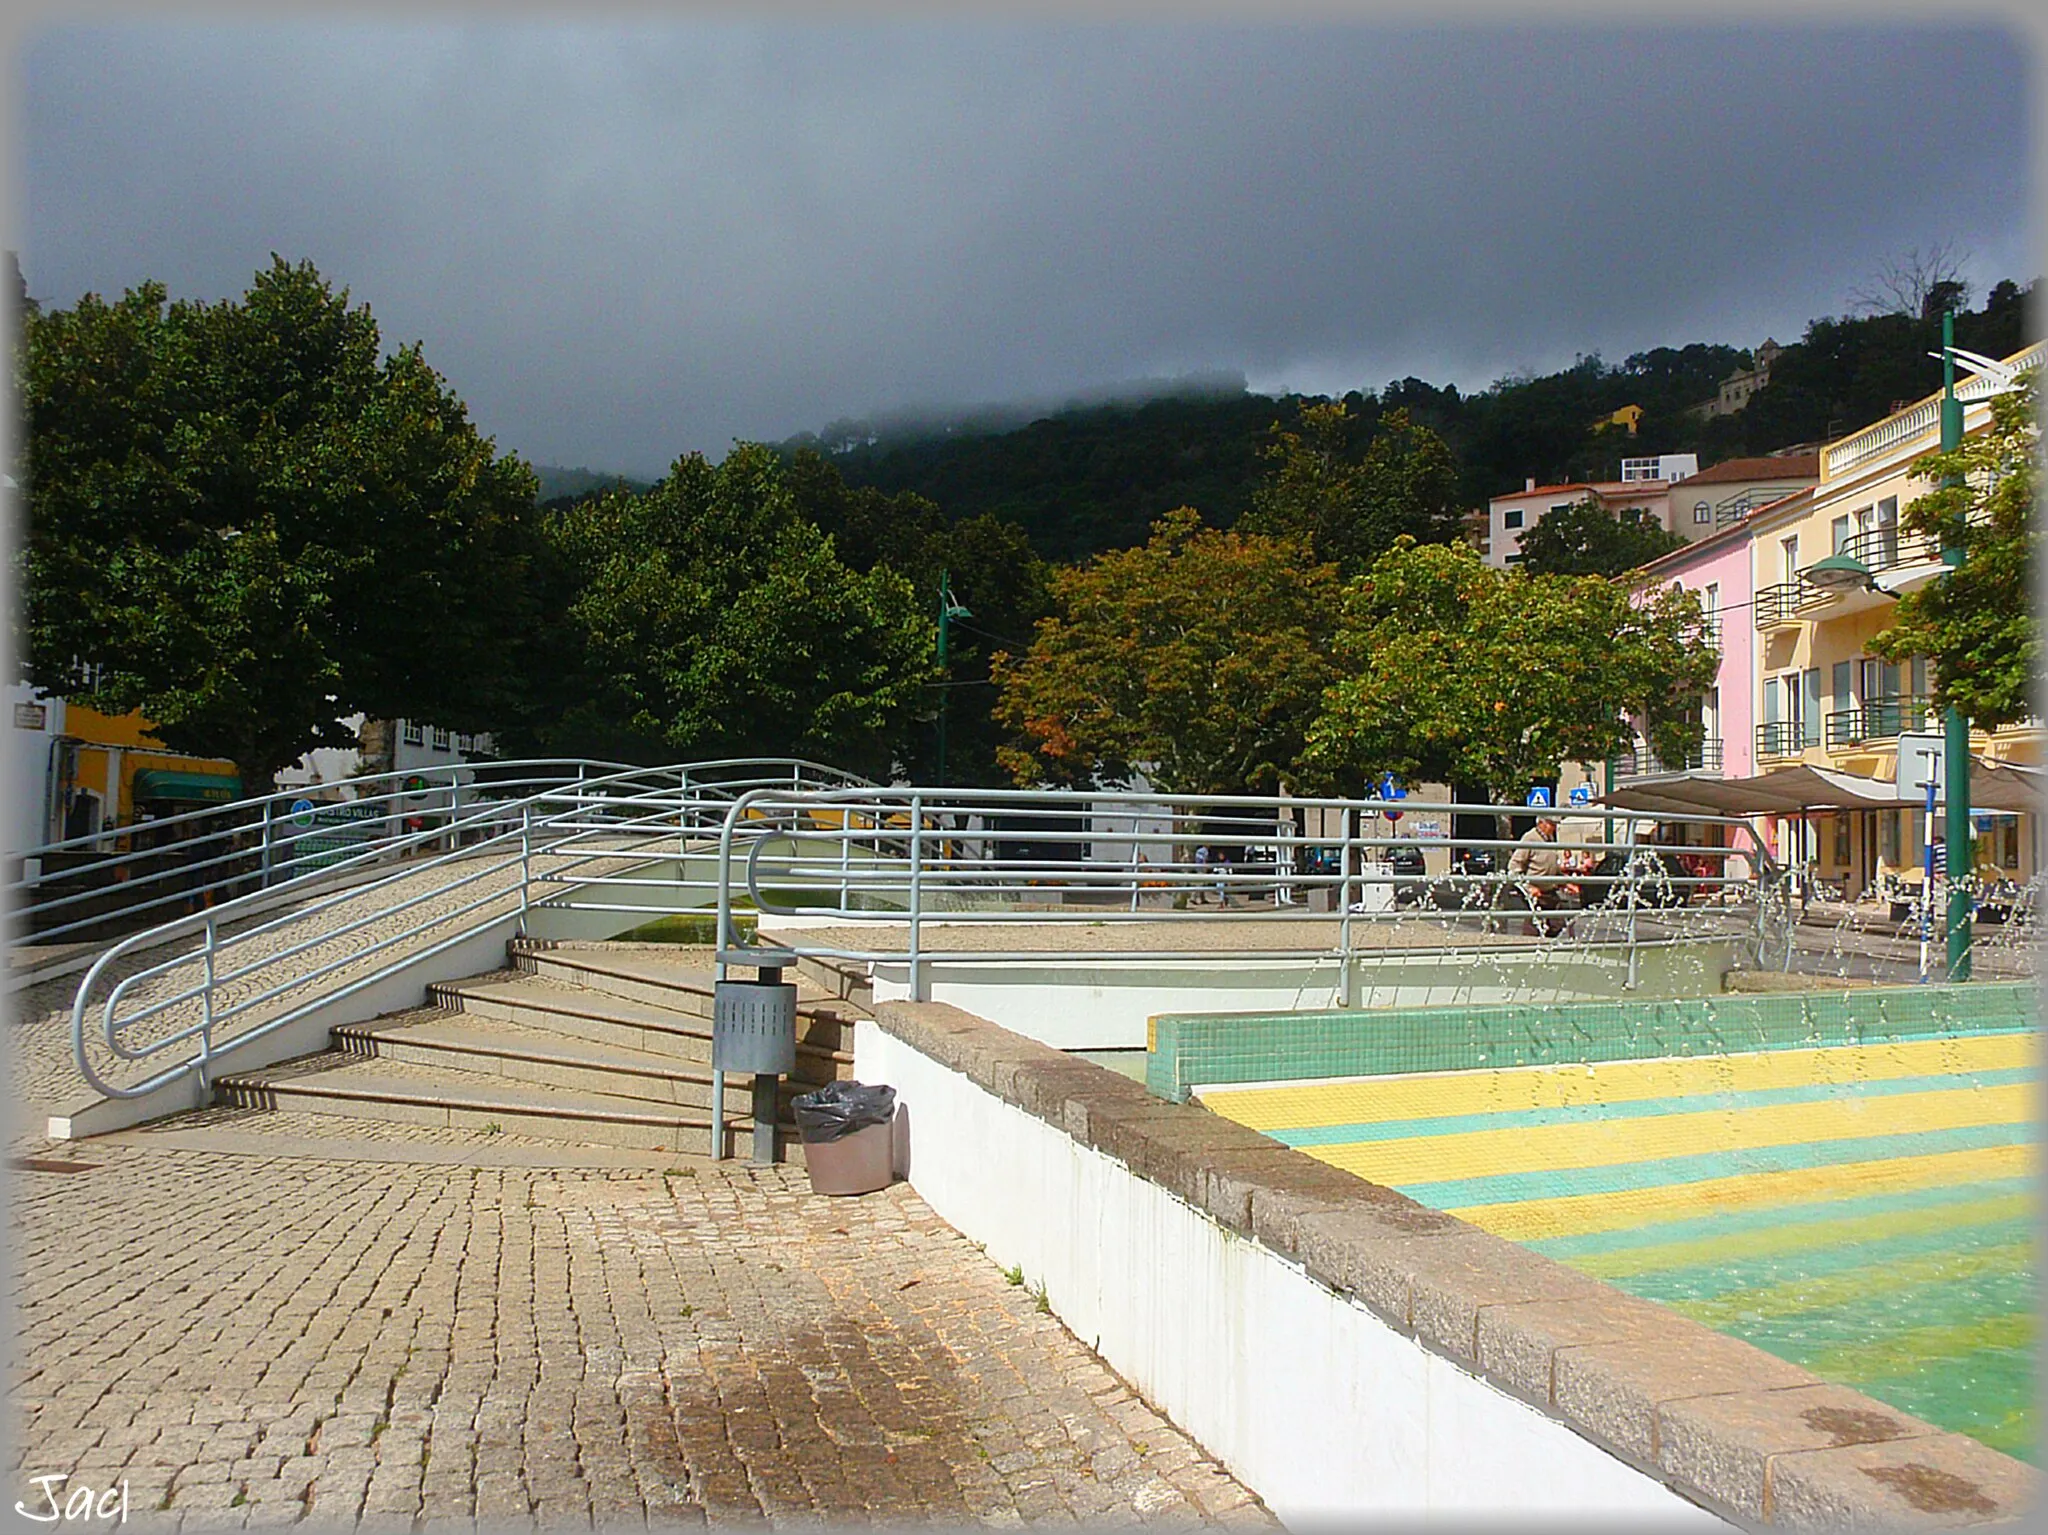 Photo showing: Water Feature in the town centre square of Monchique, Algarve, Portugal.